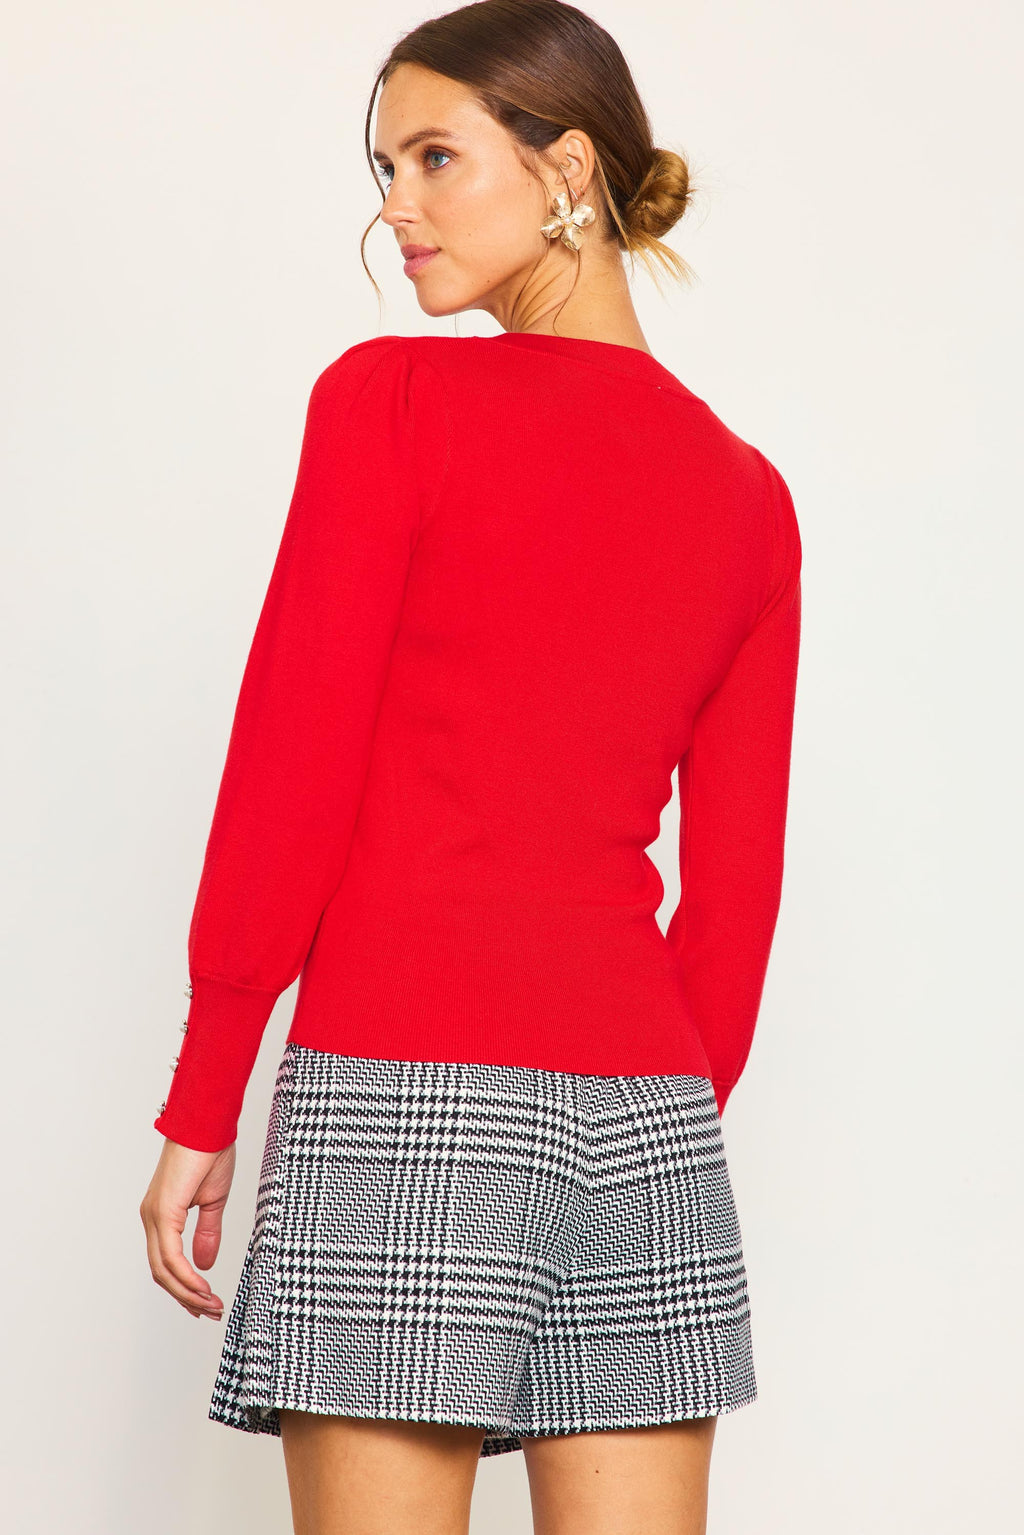 Jewel Button Sleeve Sweater- Red